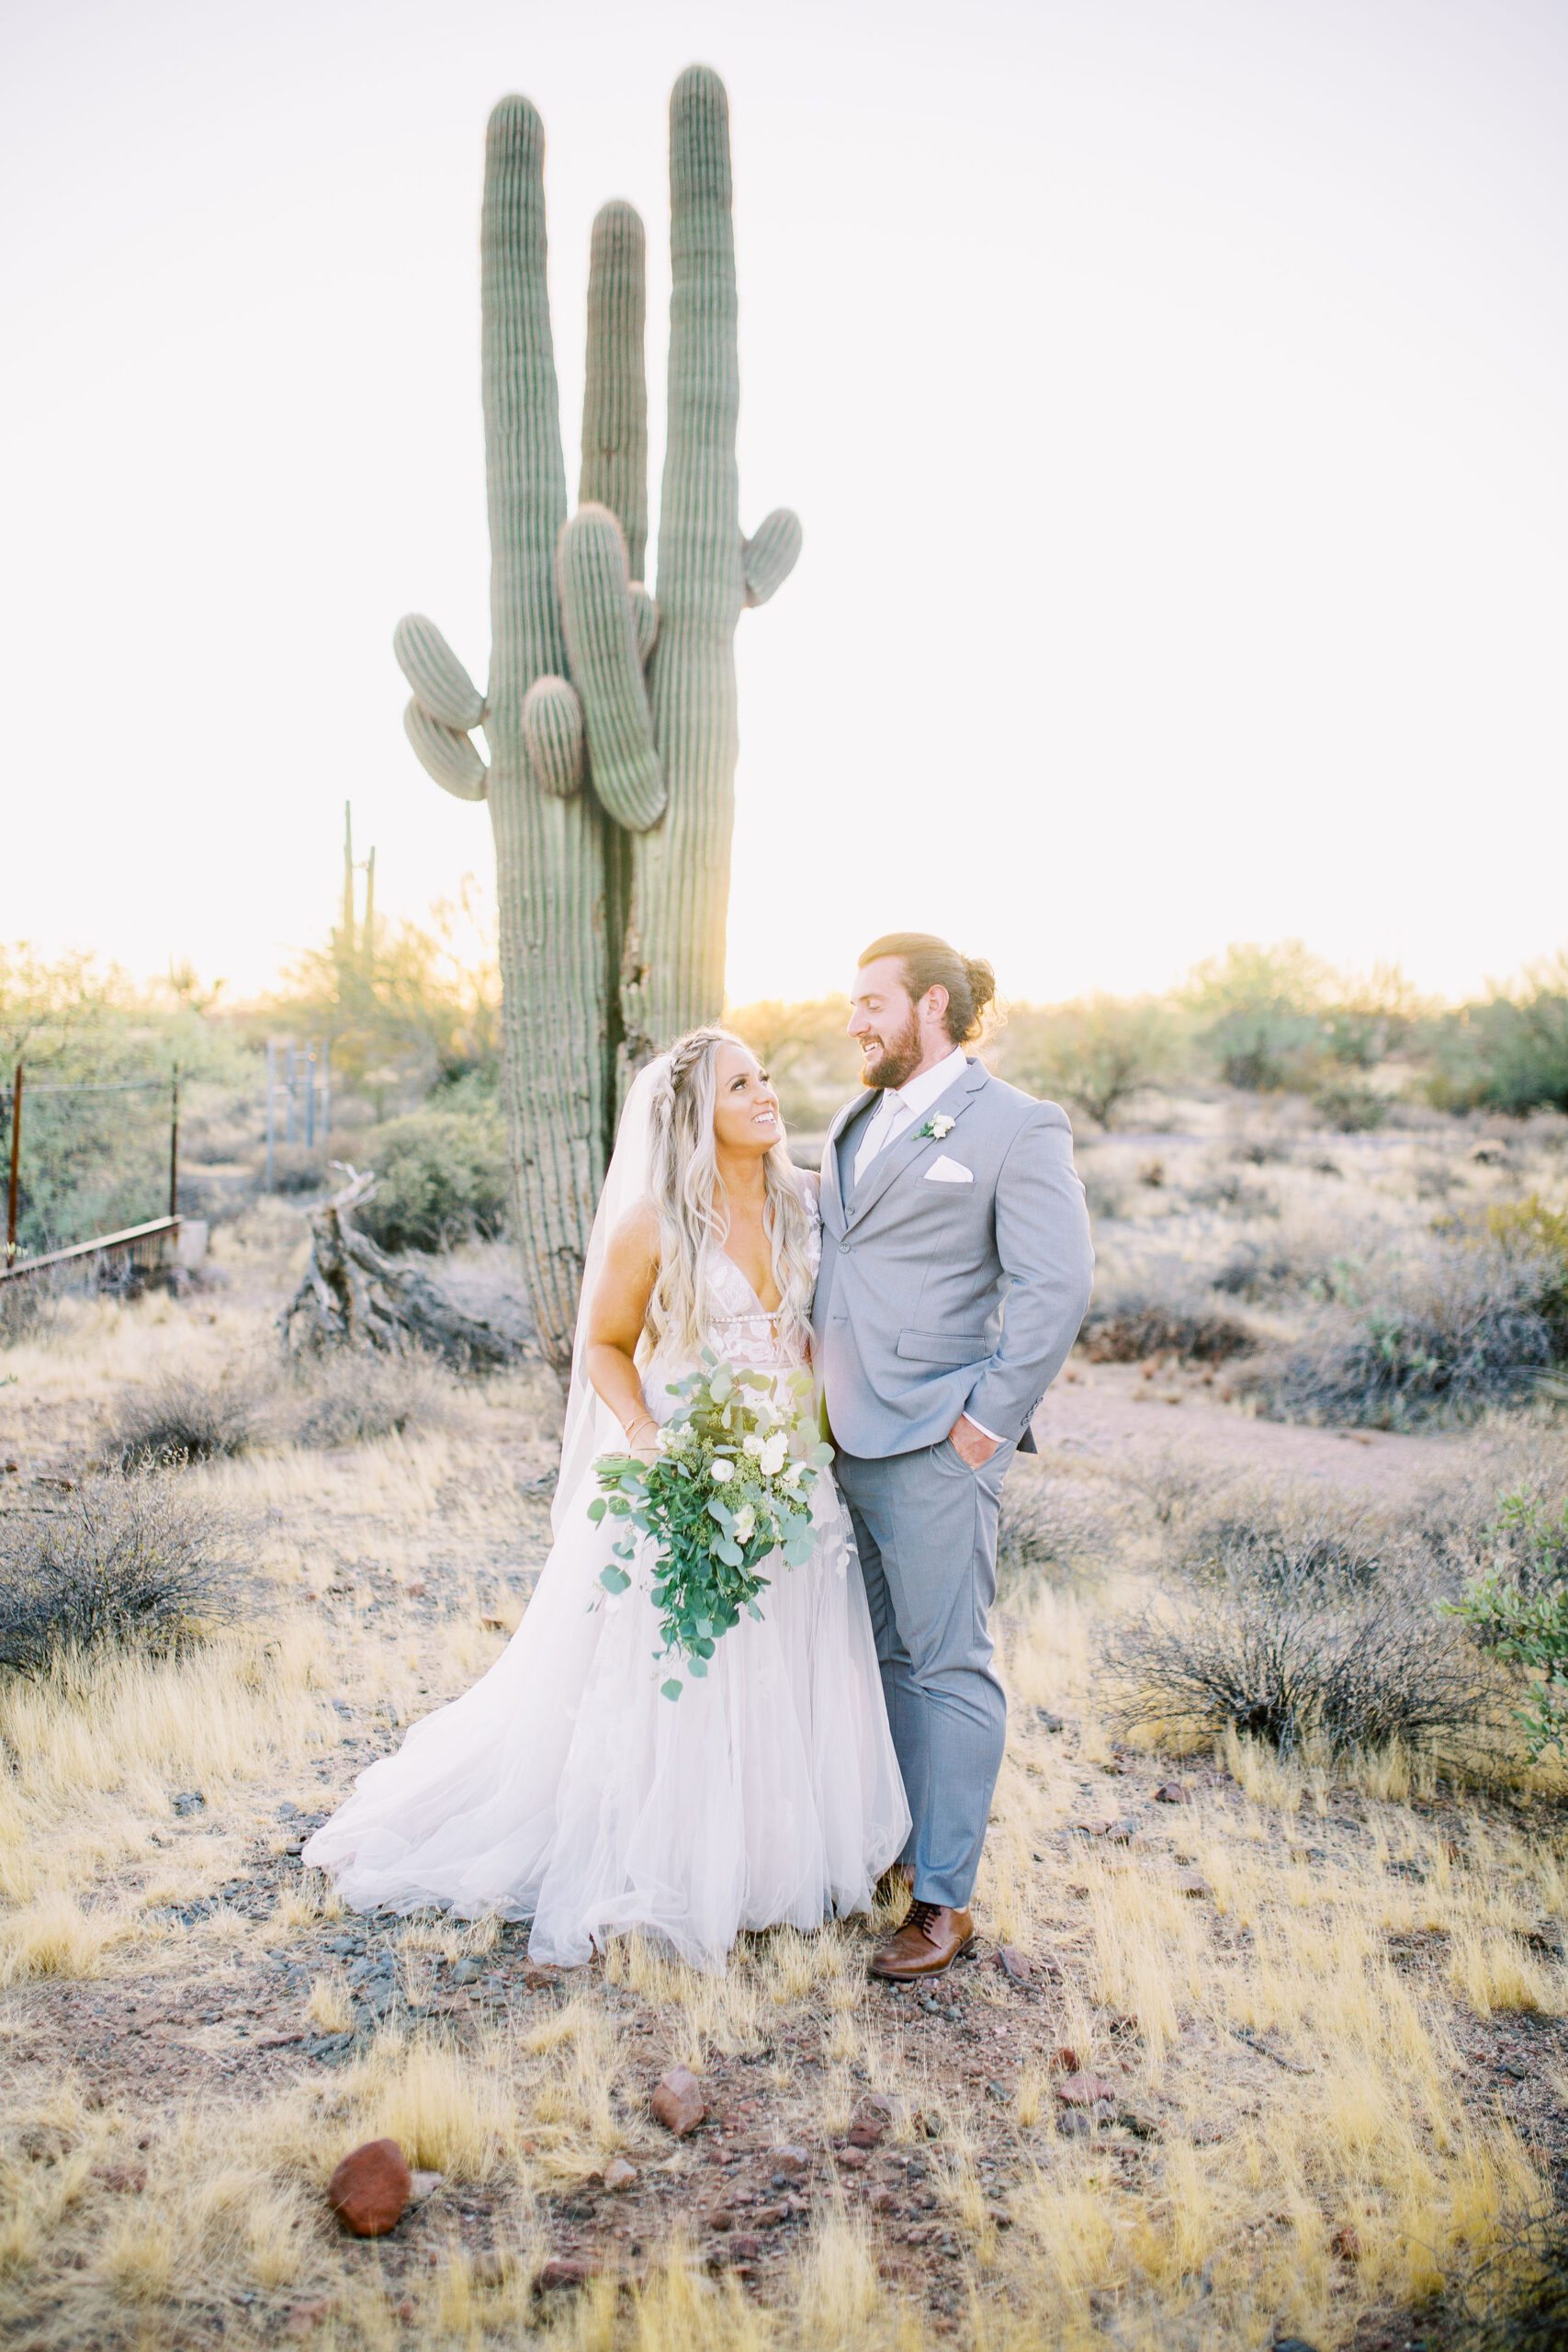 Bride and groom in light gray summer suit pose by a cactus